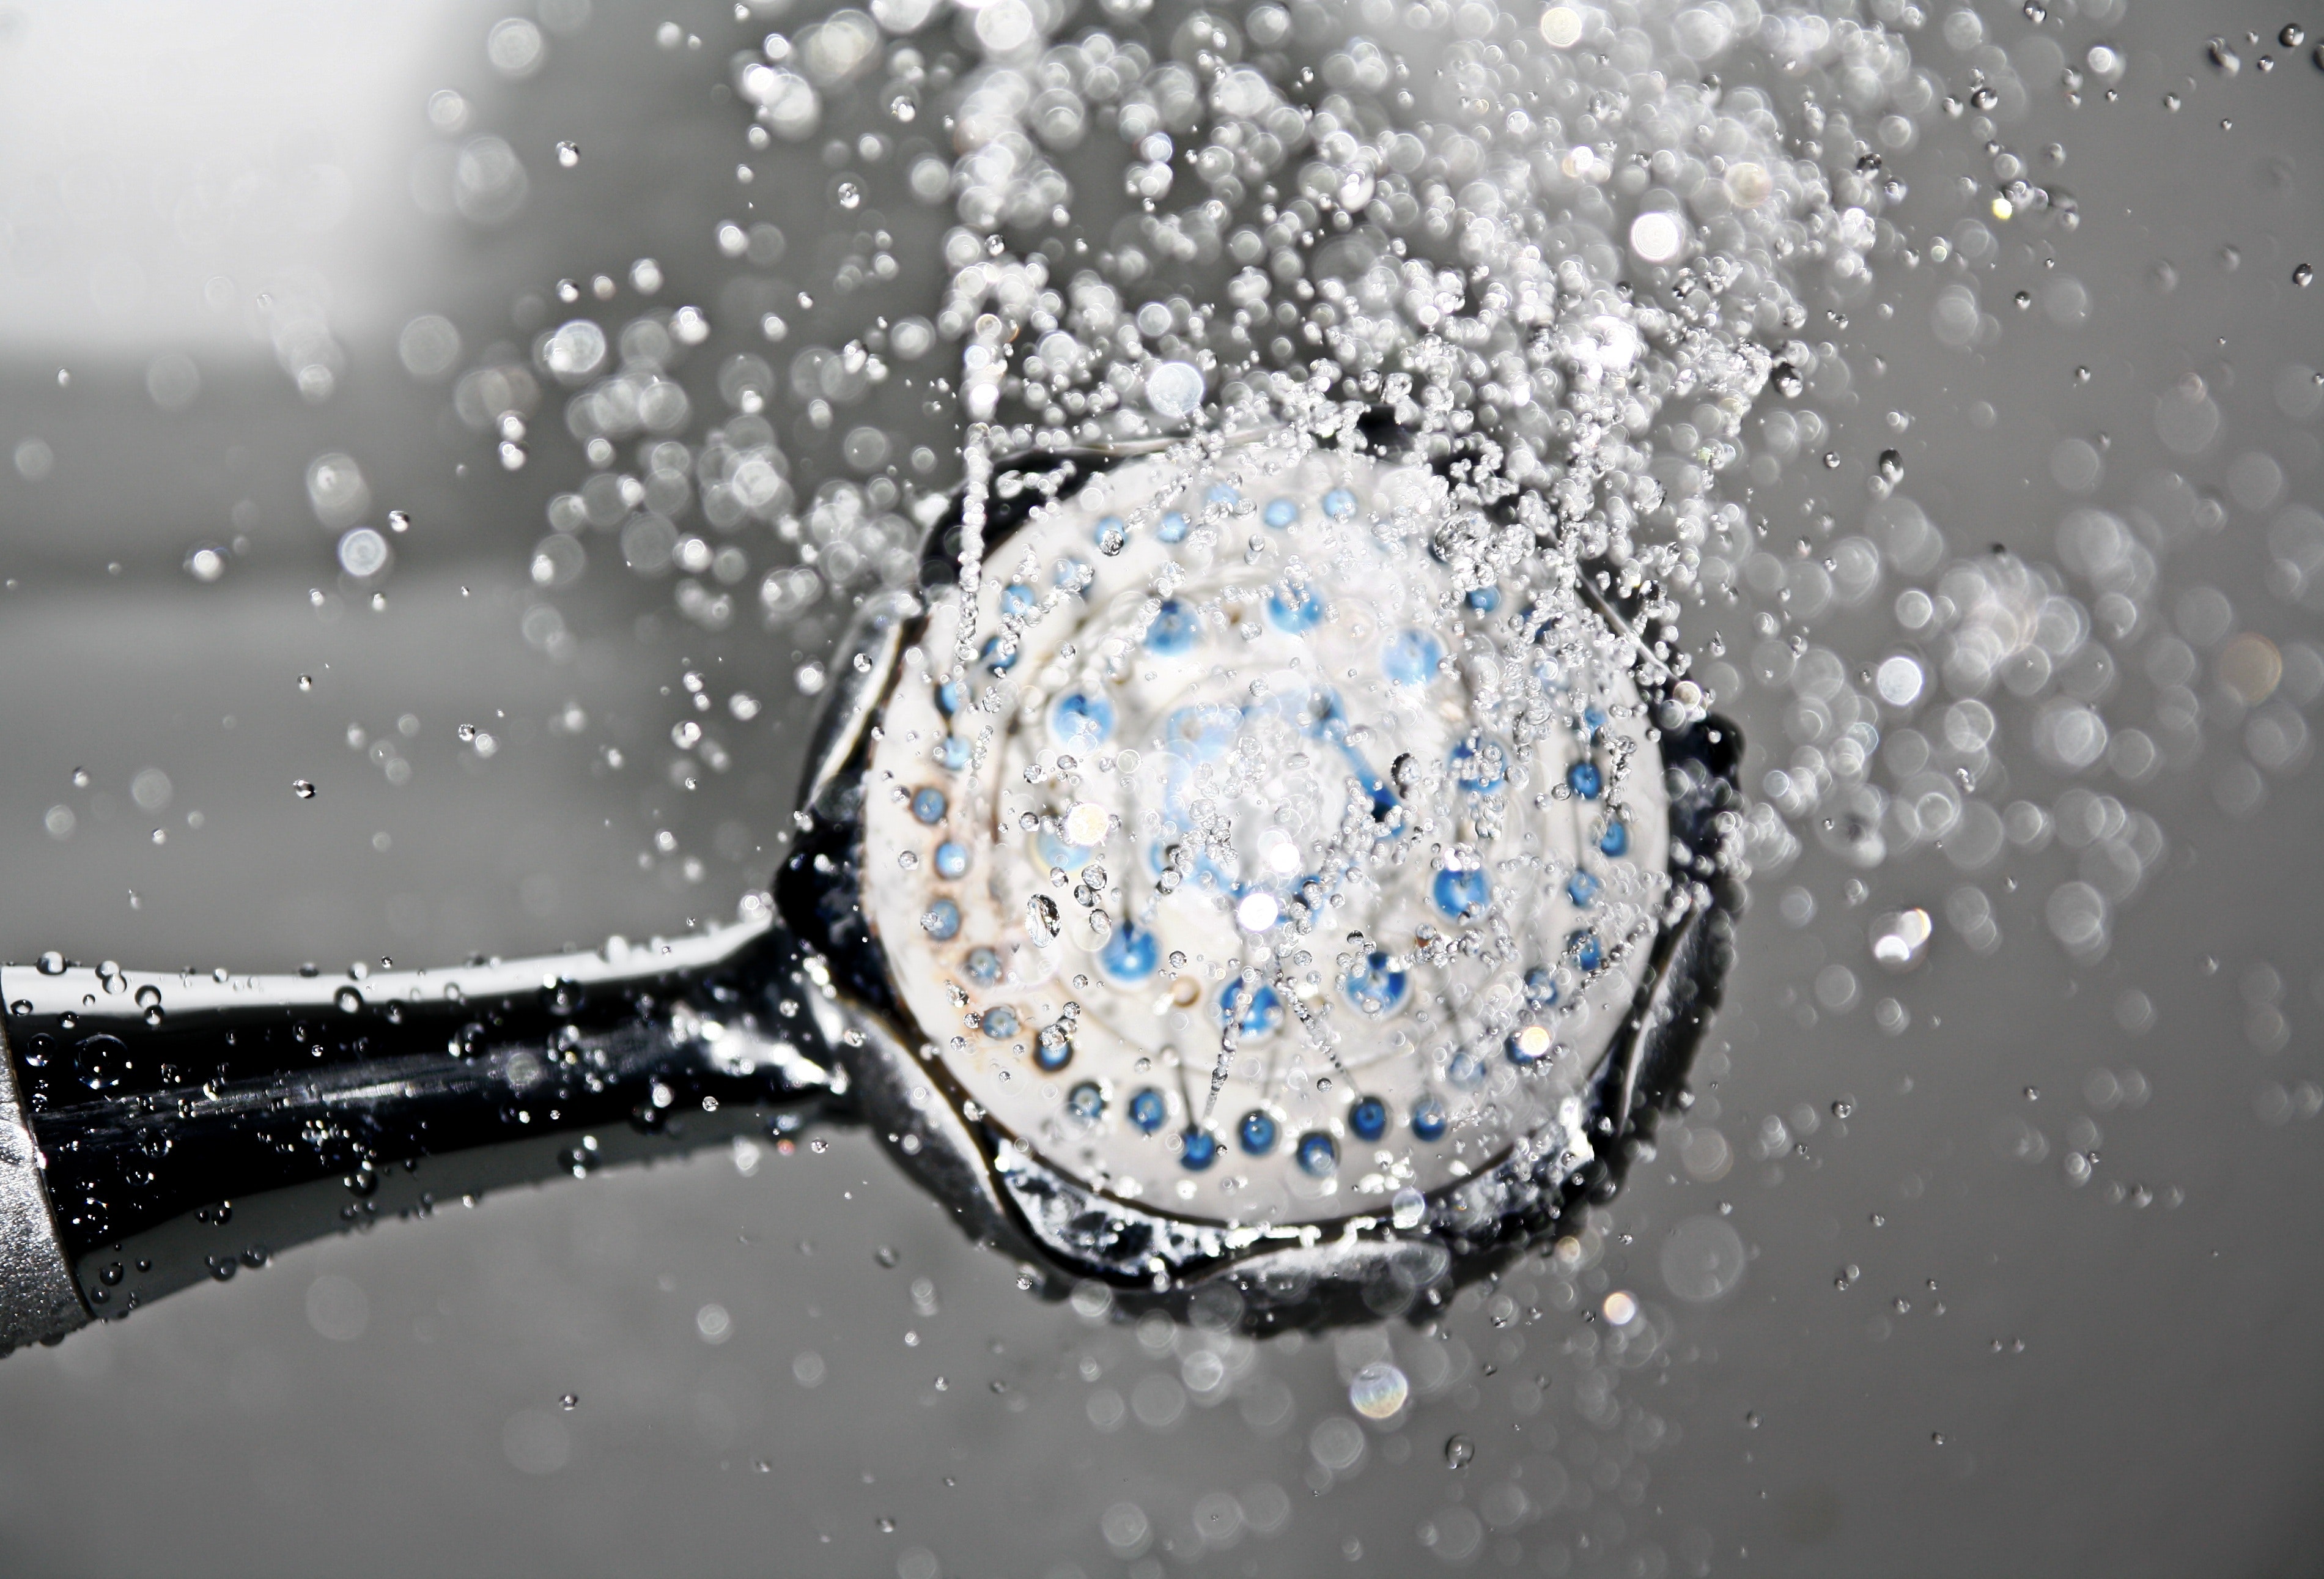 What types of commercial showers are available?